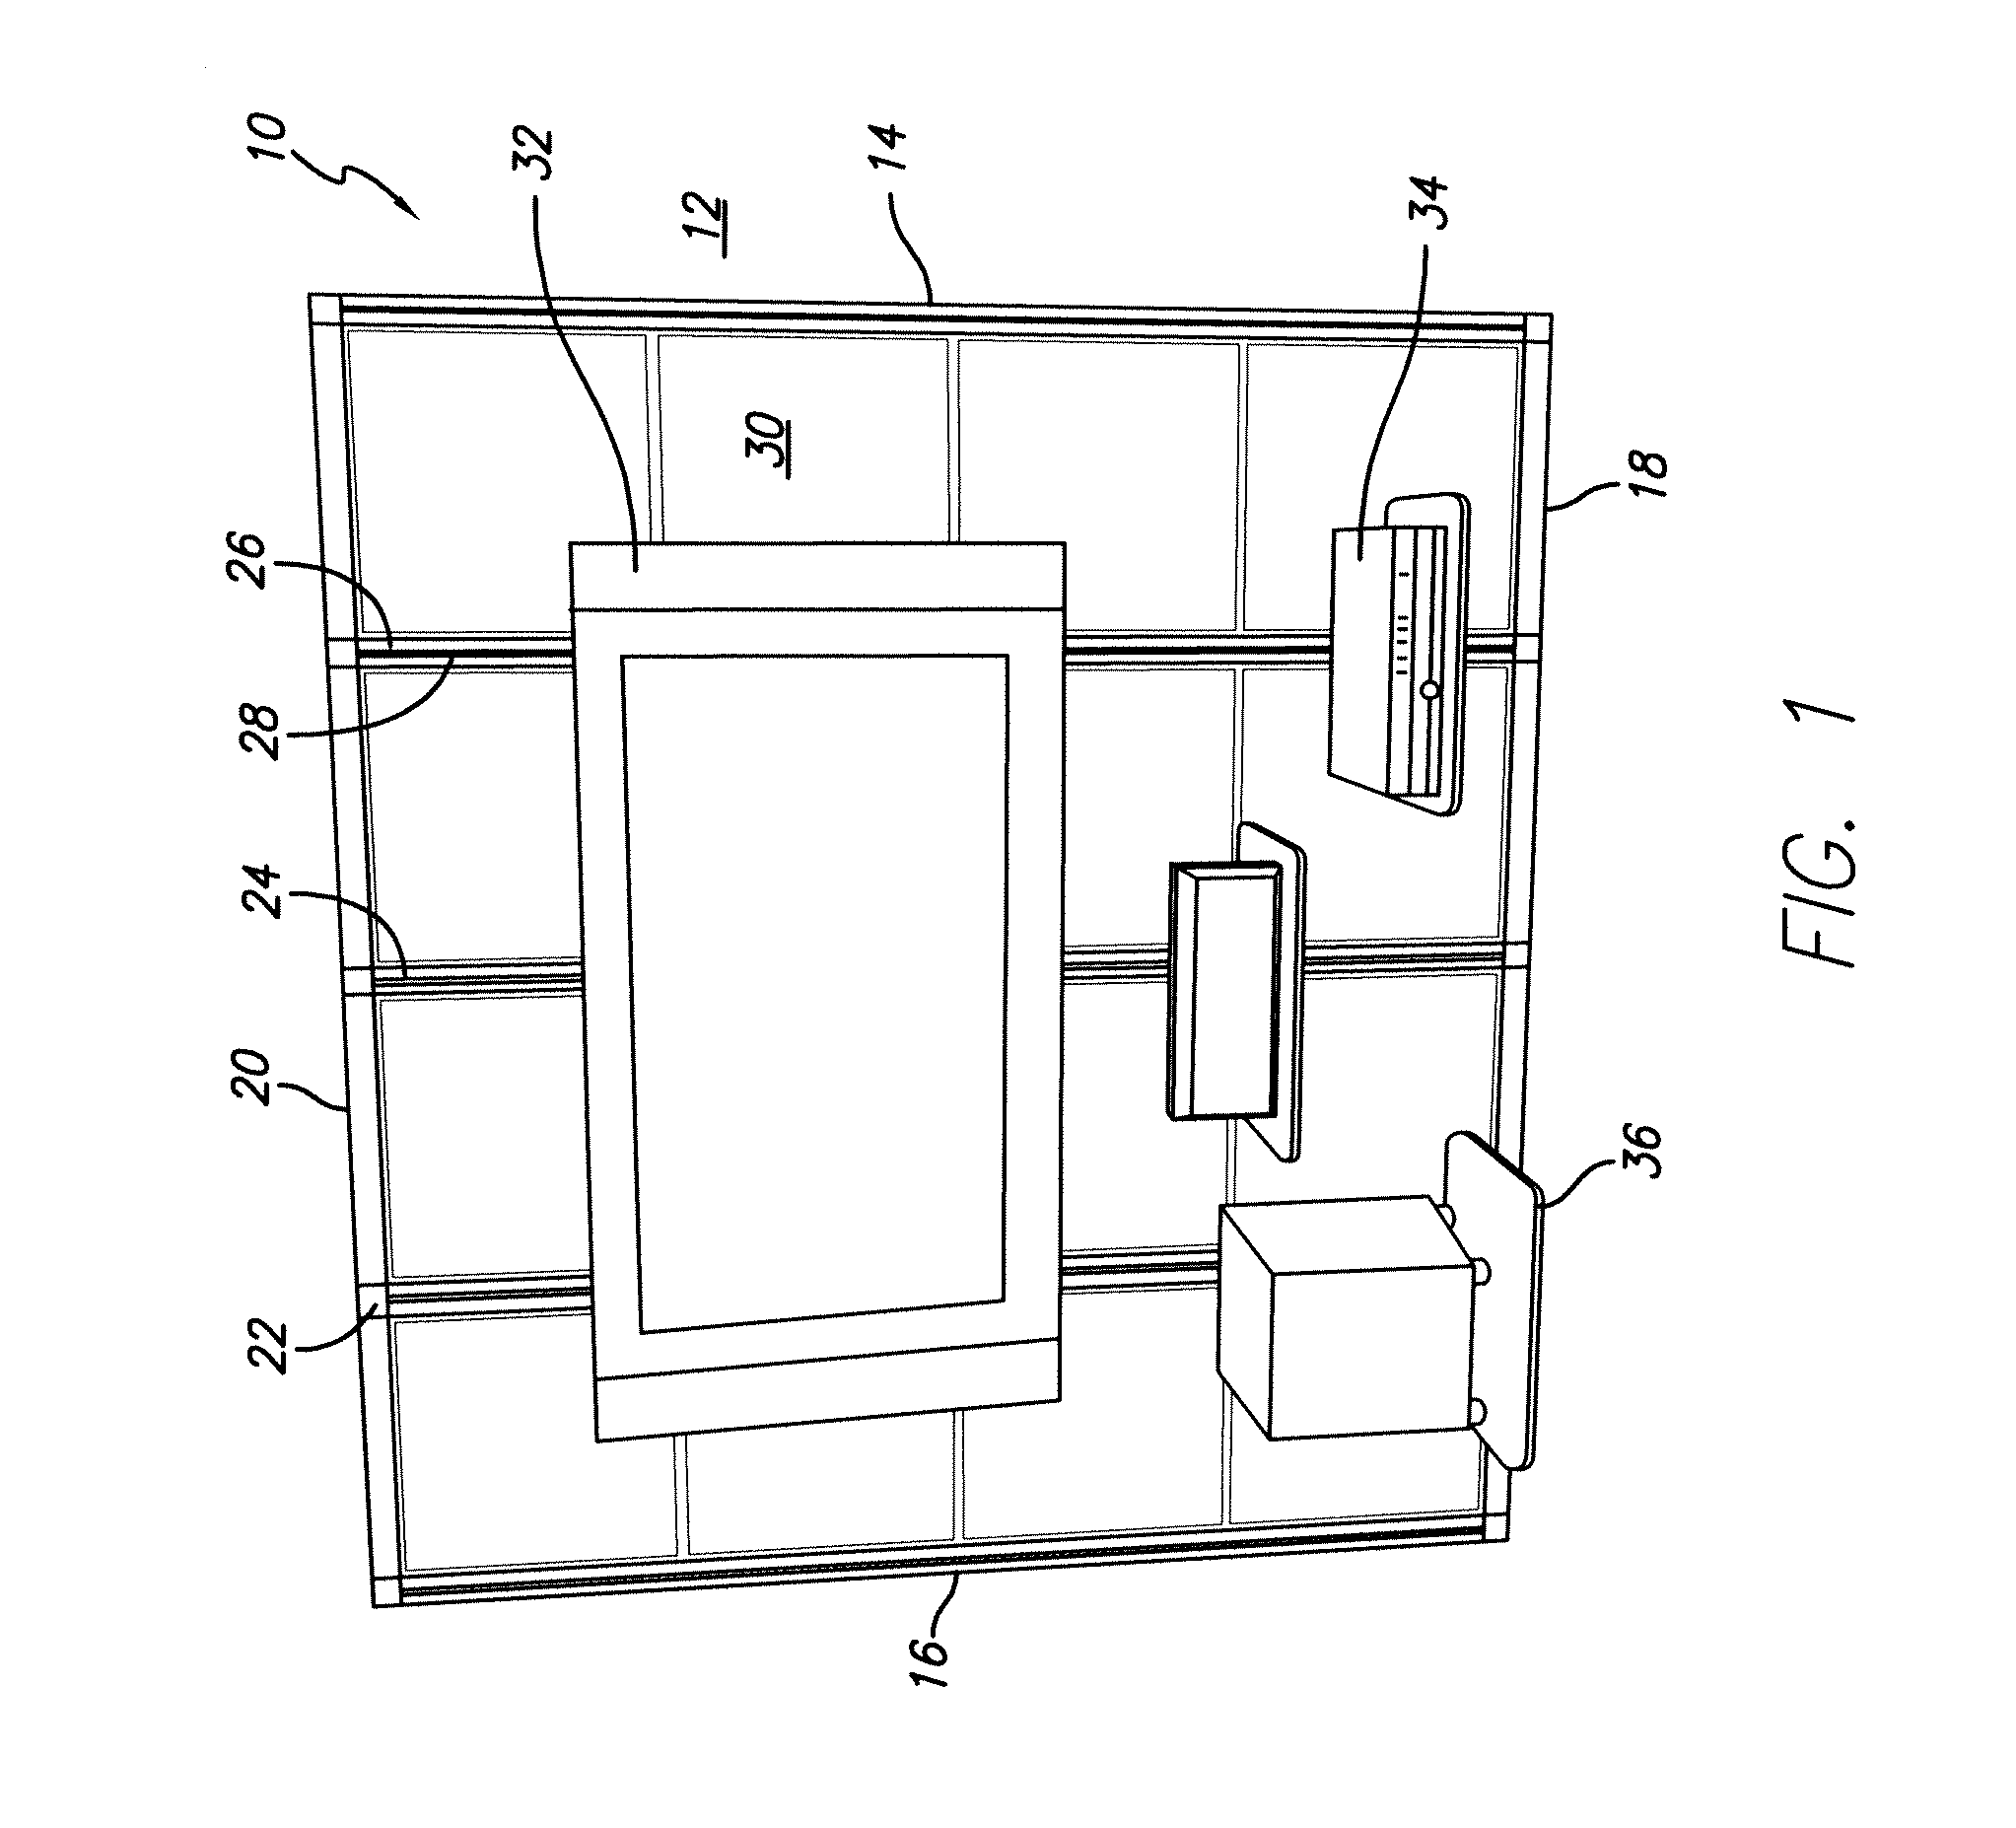 Wall mountable frame structure for mounting equipment